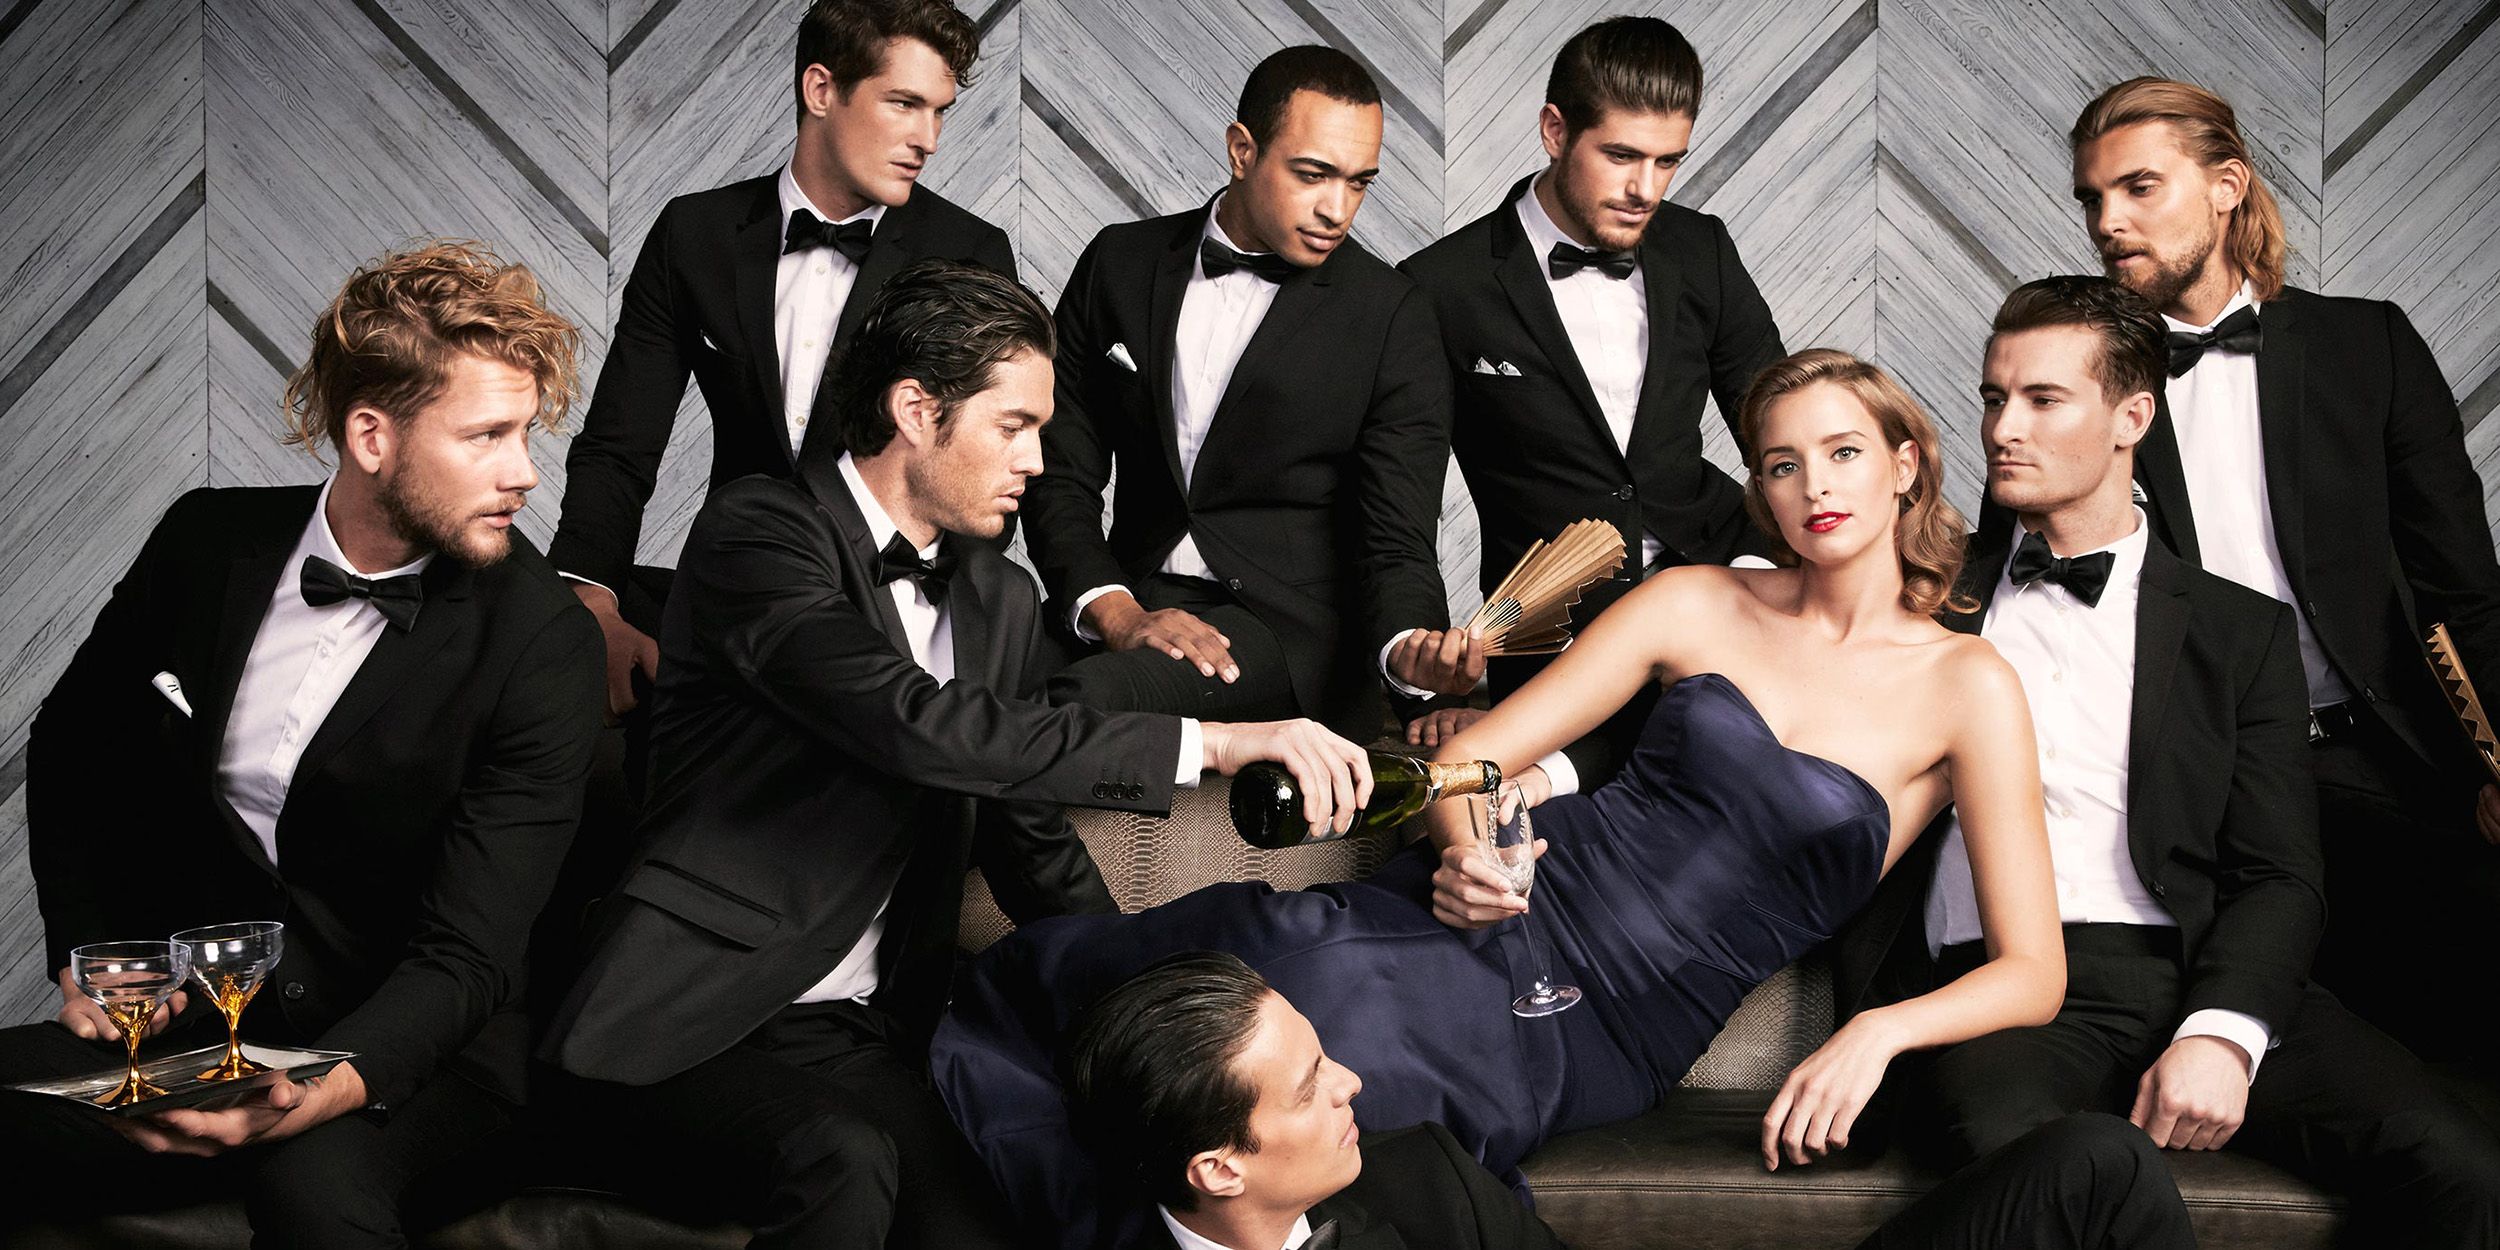 Woman in dress surrounded by many men in suits